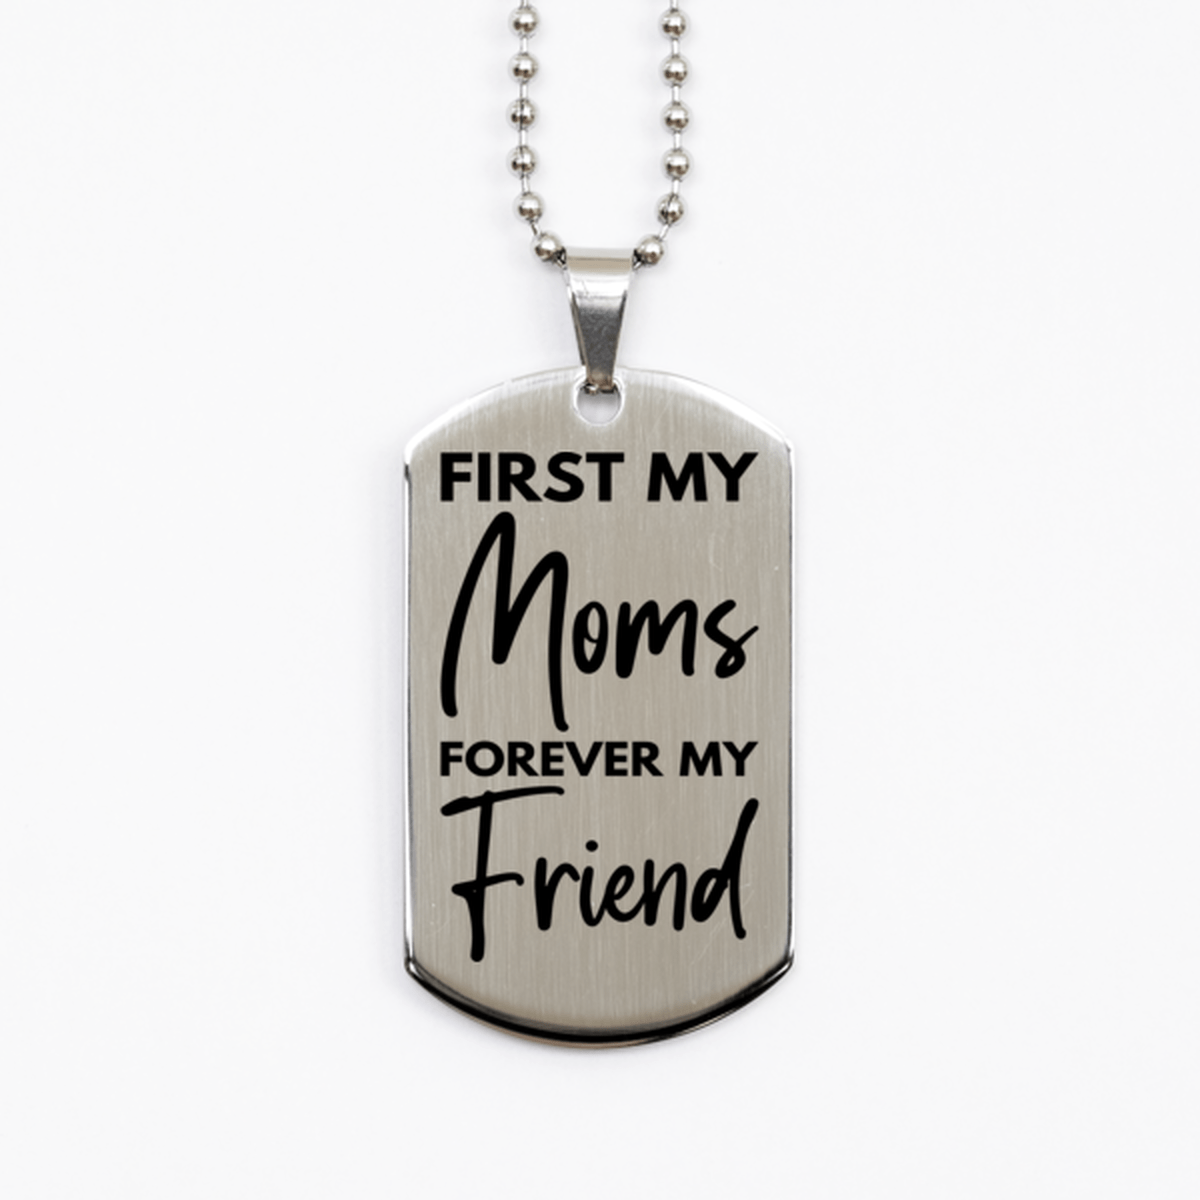 Inspirational Moms Silver Dog Tag Necklace, First My Moms Forever My Friend, Best Birthday Gifts for Moms